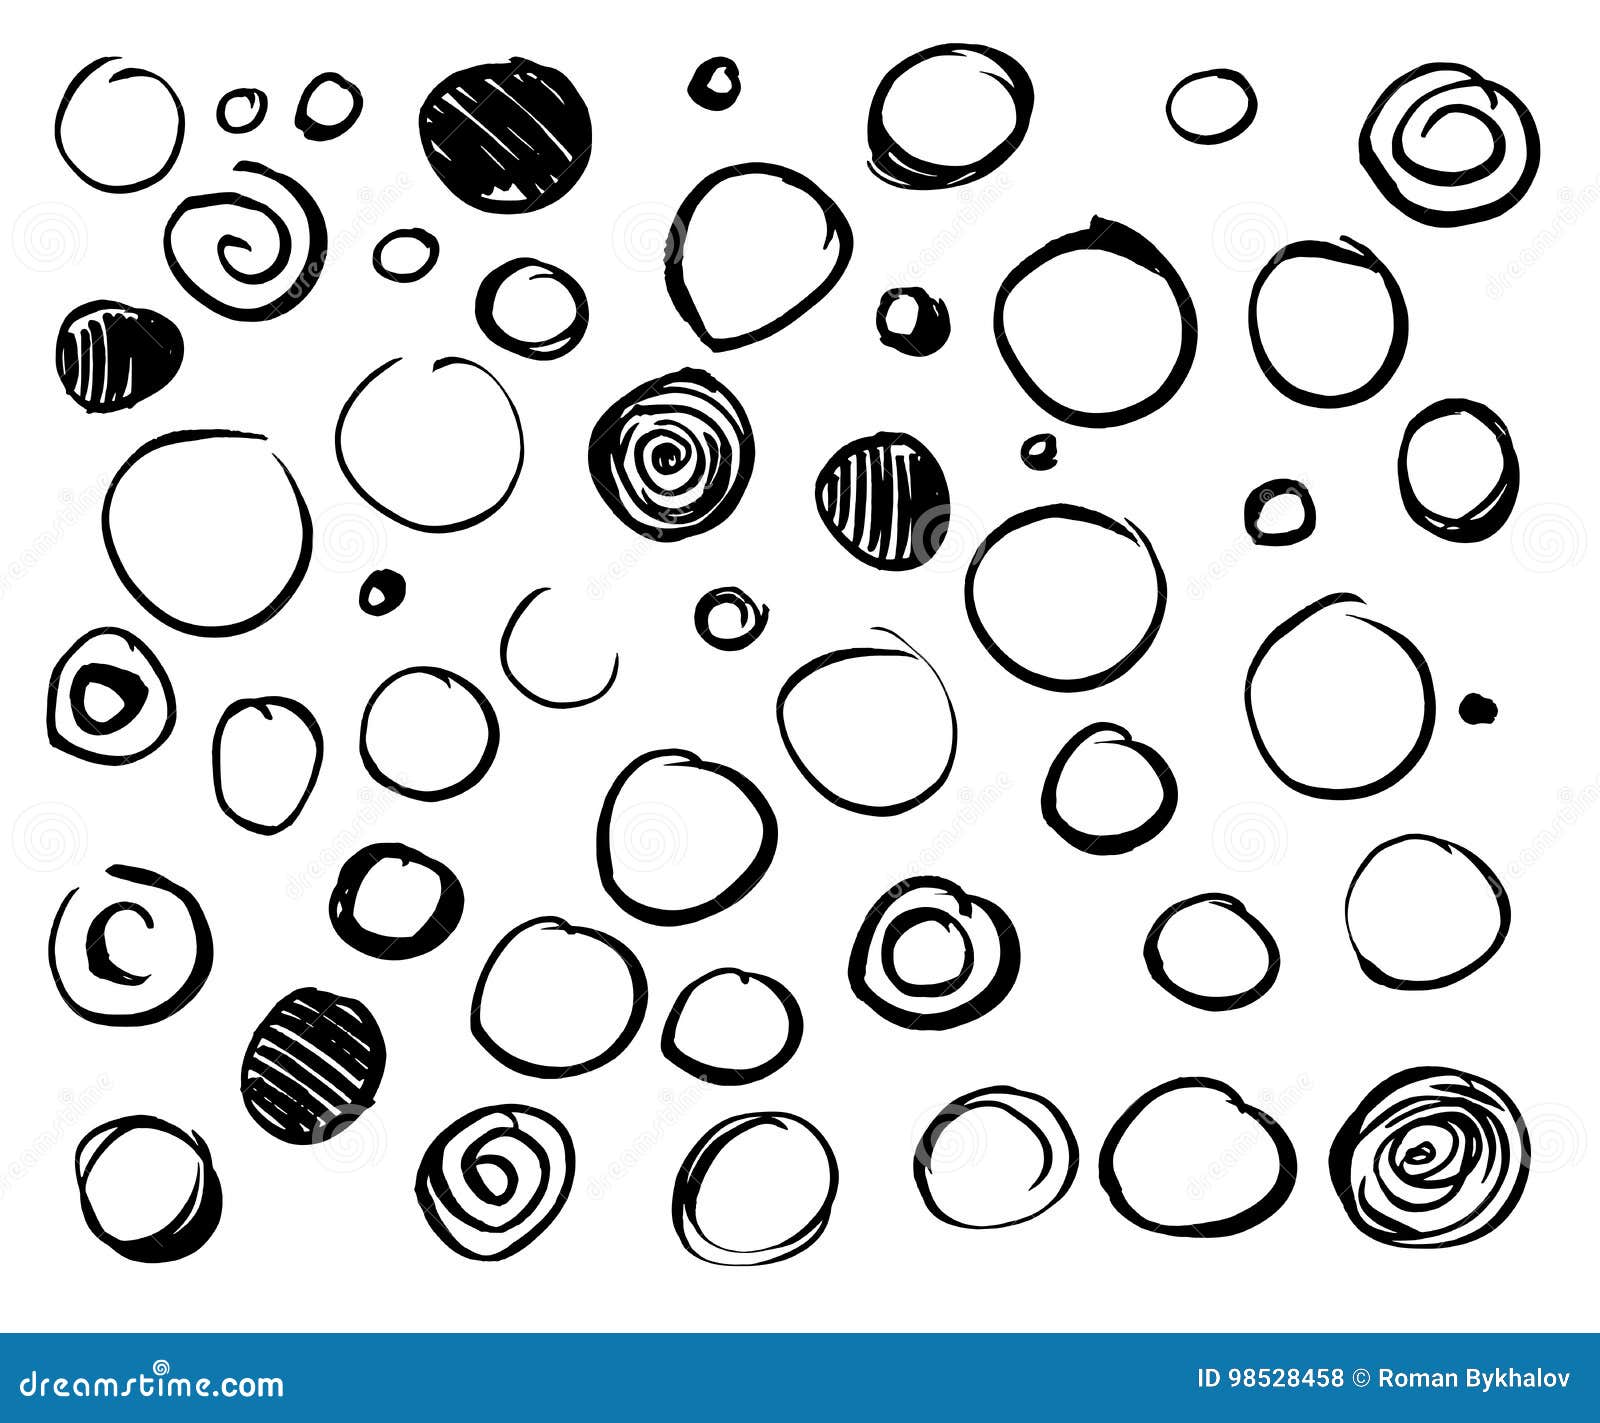 Set scribble circles stock vector. Illustration of graphic - 98528458